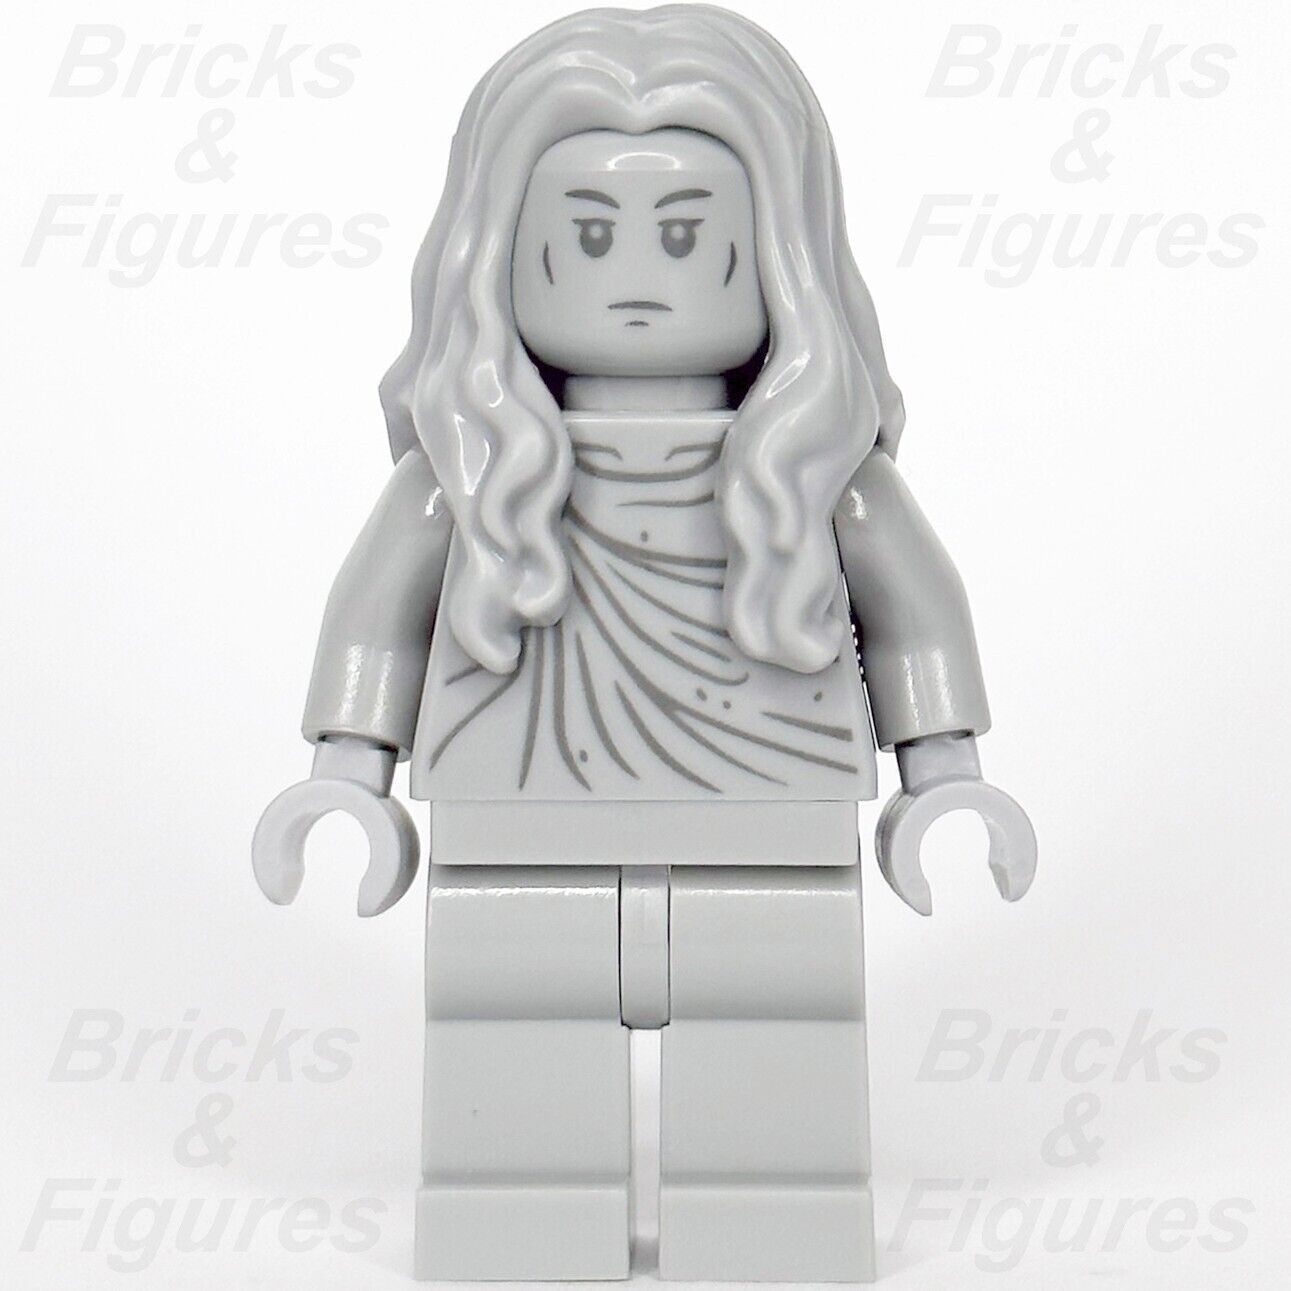 LEGO Elf Statue Minifigure The Hobbit & The Lord of the Rings 10316 lor115 LOTR - Bricks & Figures